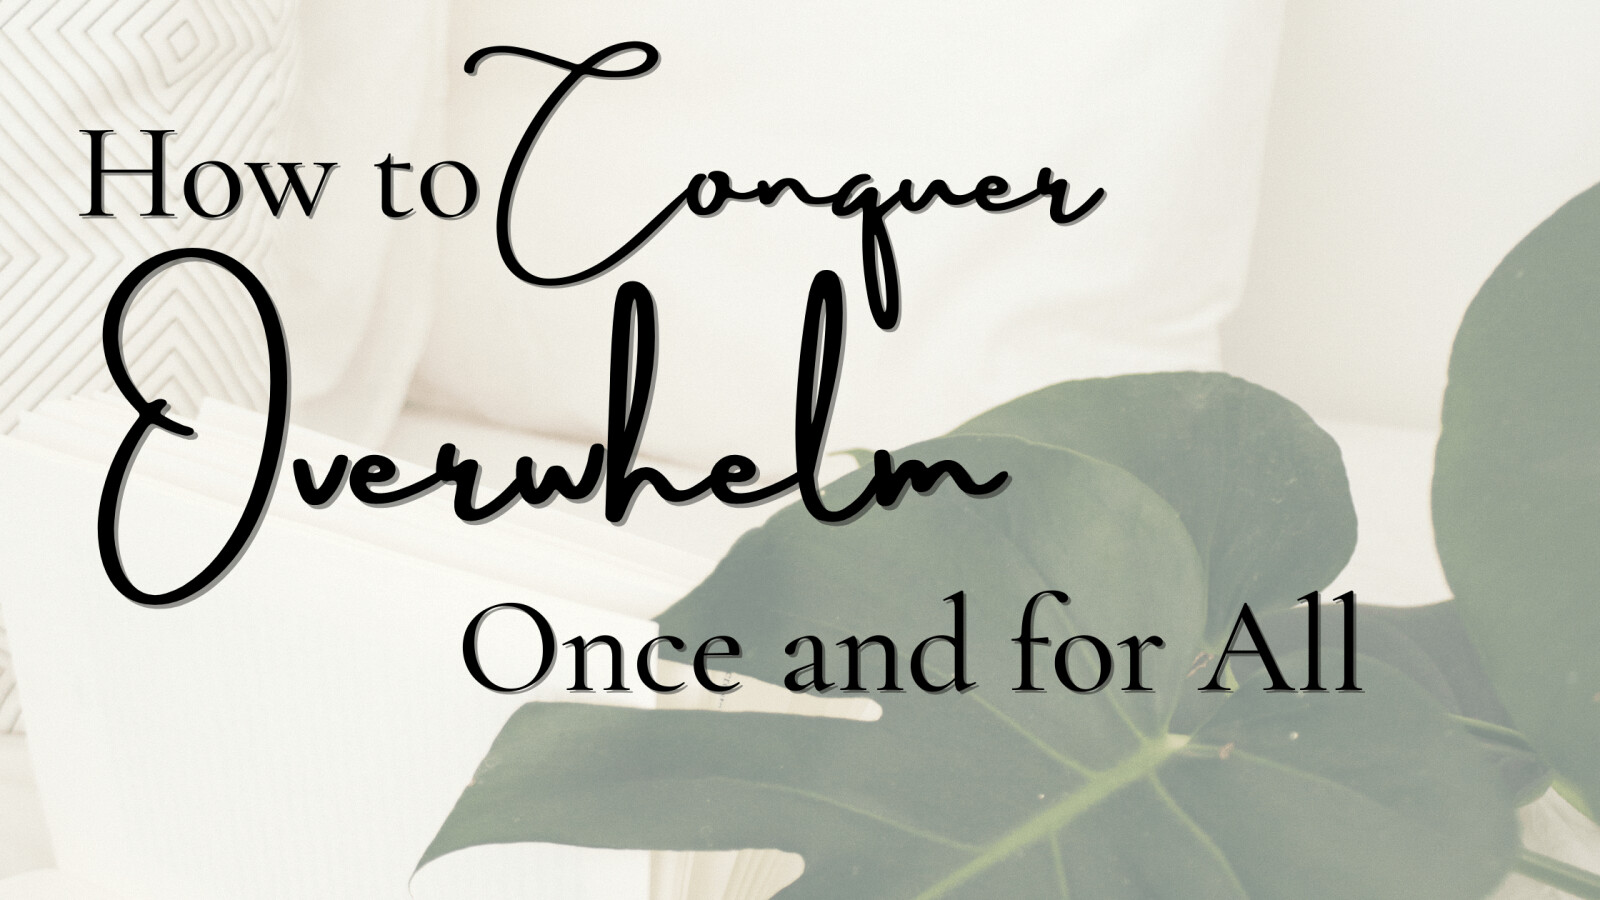 How to Conquer Overwhelm Once and for All